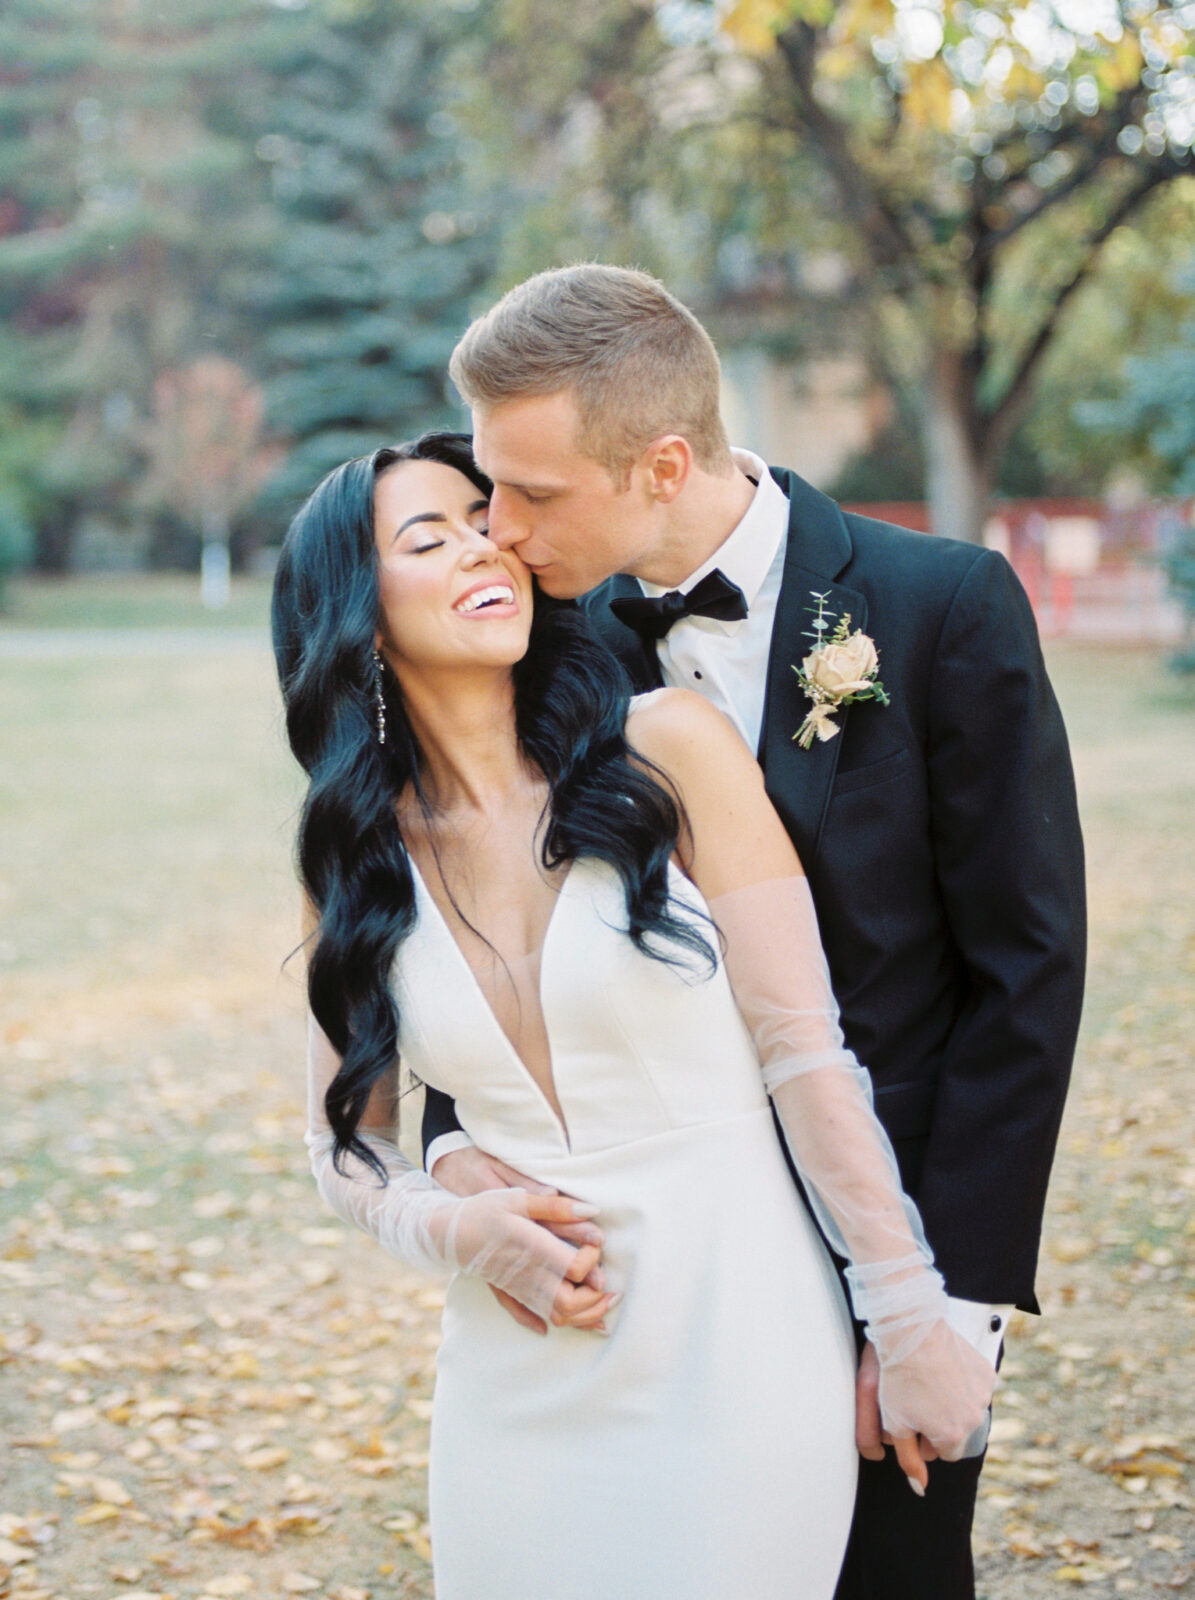 Heartwarming couples portraits in a park setting during the fall season, bridal gown with bridal gloves by Kelly Parker Atelier, modern bride hairstyle with loose curls and trendy middle part styled by Hair Designs by Maggie